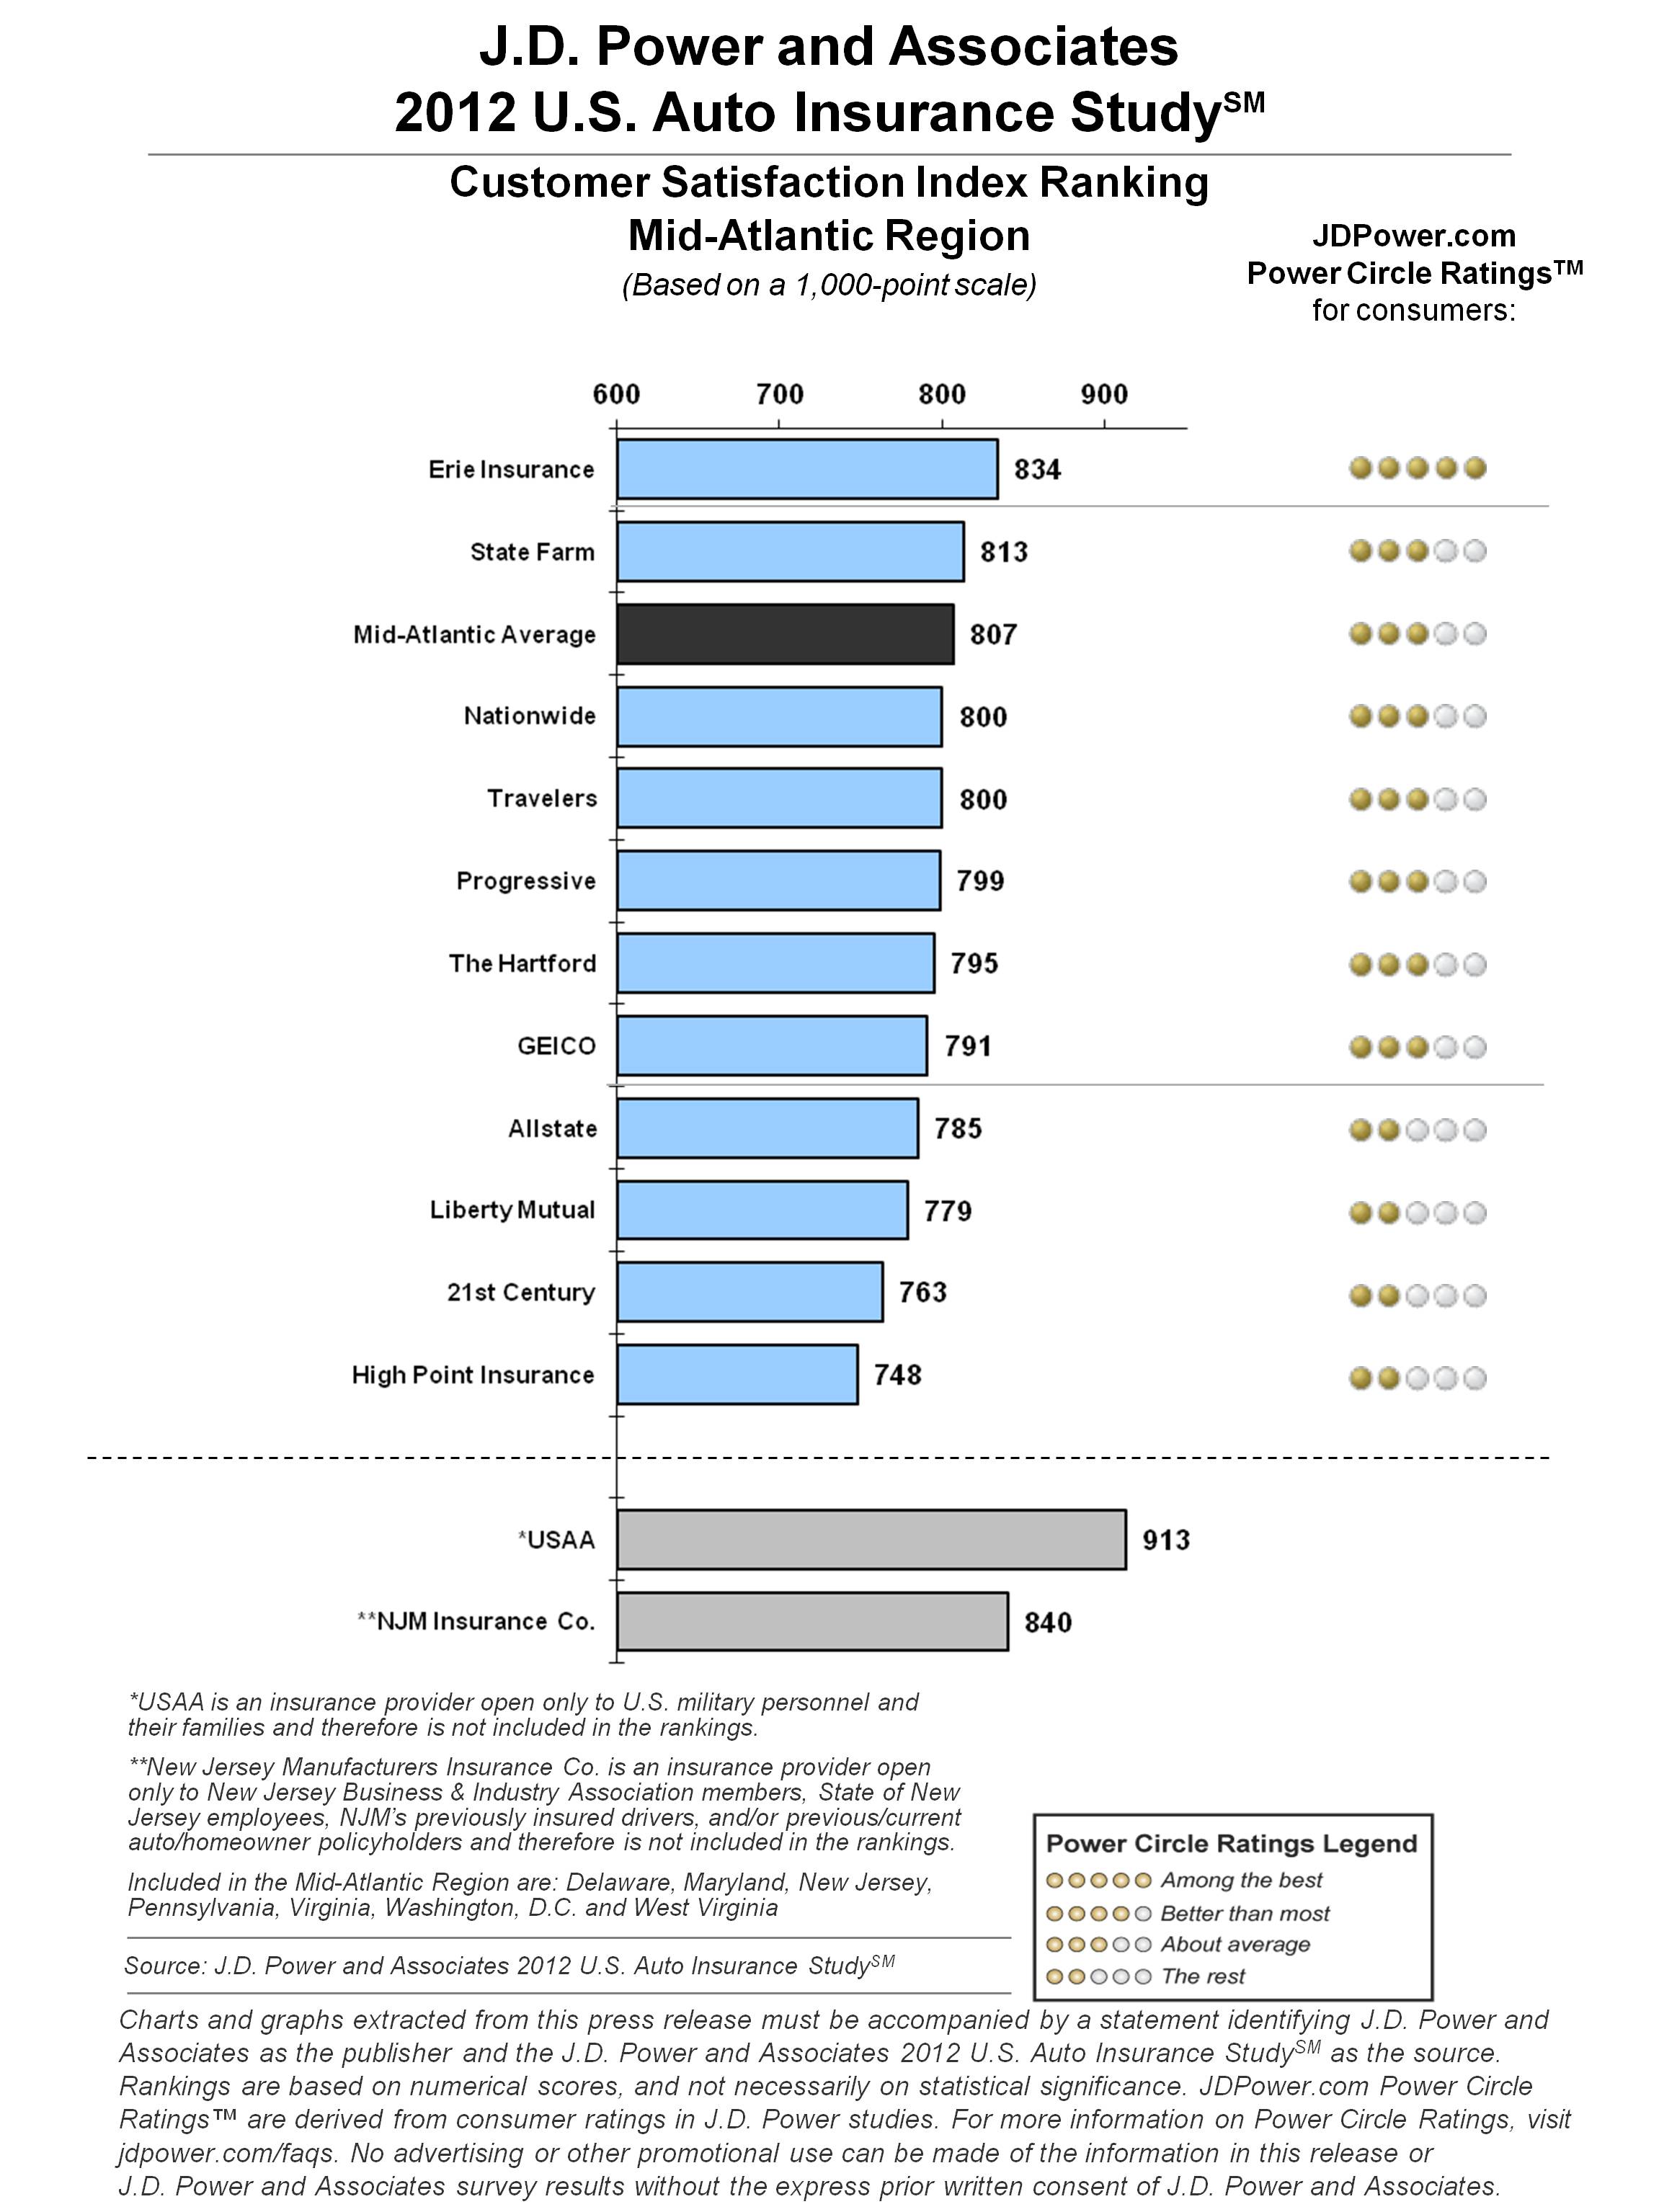 Ratings of Home and Auto Insurance Companies